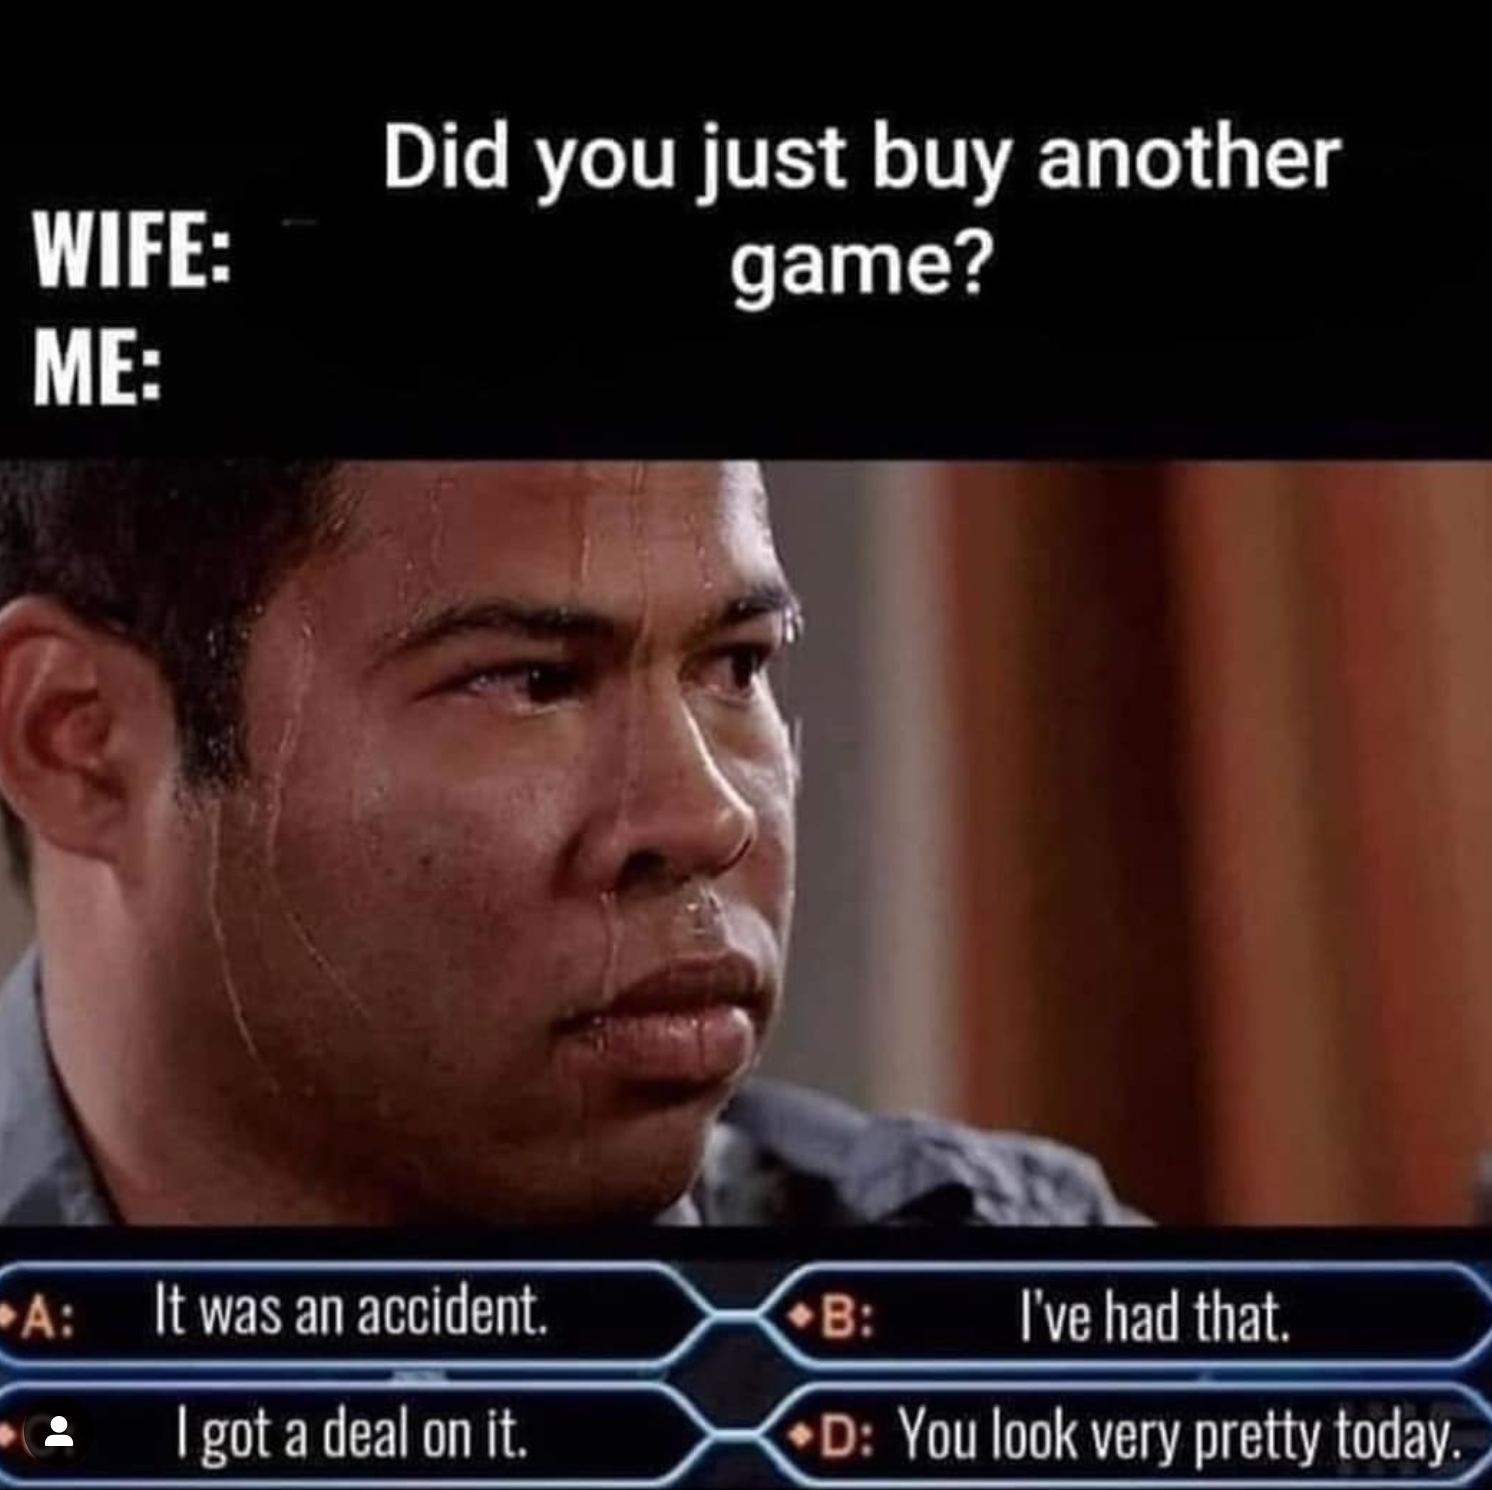 funny gaming memes - gamer husband meme - Wife Me Did you just buy another game? A It was an accident. I got a deal on it. B I've had that. D You look very pretty today.